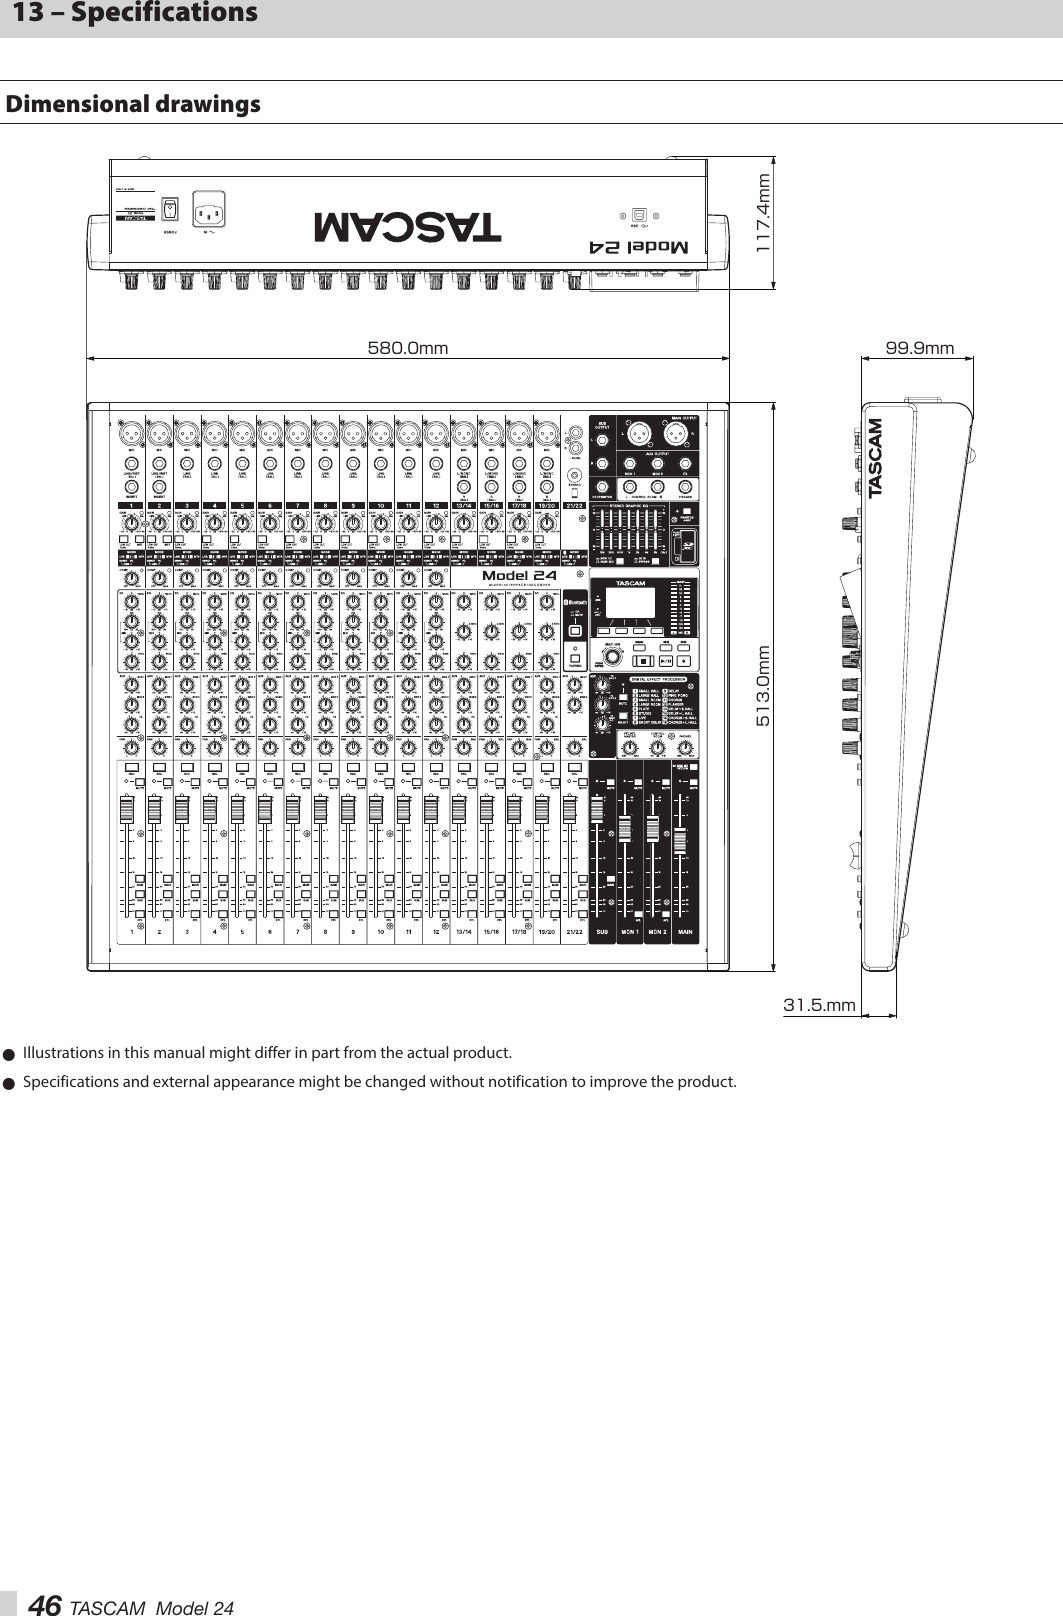 46 TASCAM  Model 2413 – SpecificationsDimensional drawings117.4mm99.9mm513.0mm580.0mm31.5.mm 0Illustrations in this manual might differ in part from the actual product. 0Specifications and external appearance might be changed without notification to improve the product.